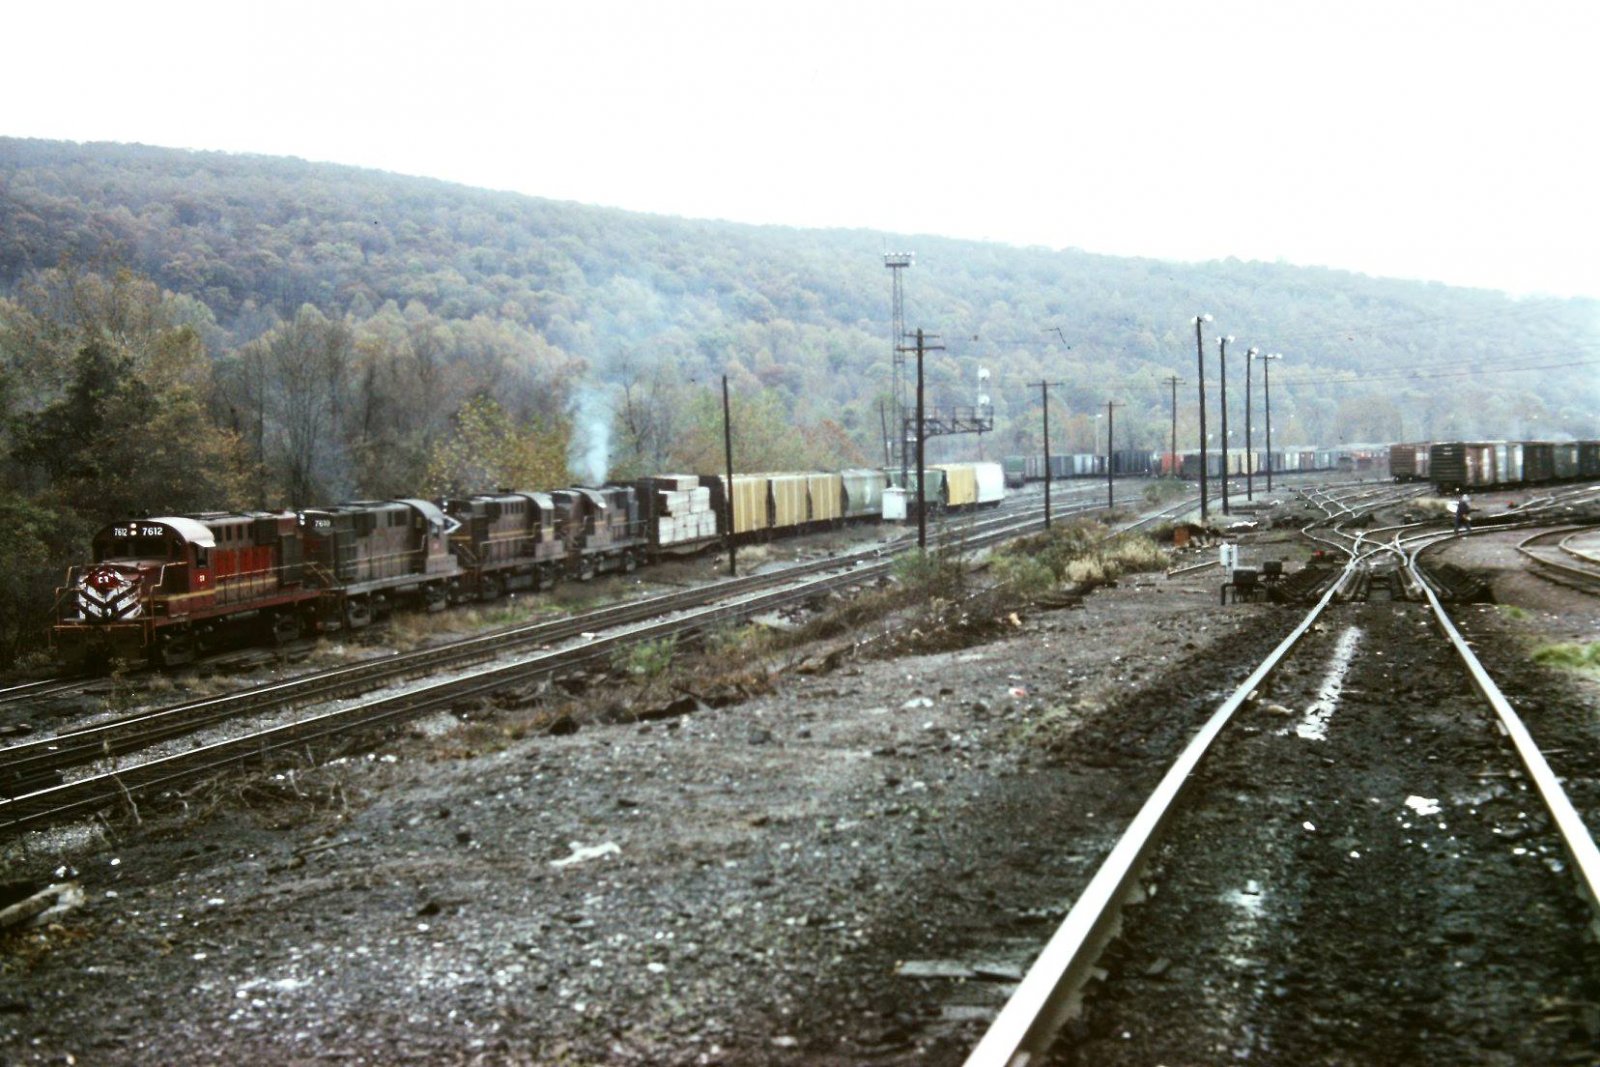 CR 7612 doubling out of the Heavy Side at Allentown 11-1976 - D. Bednar.jpg